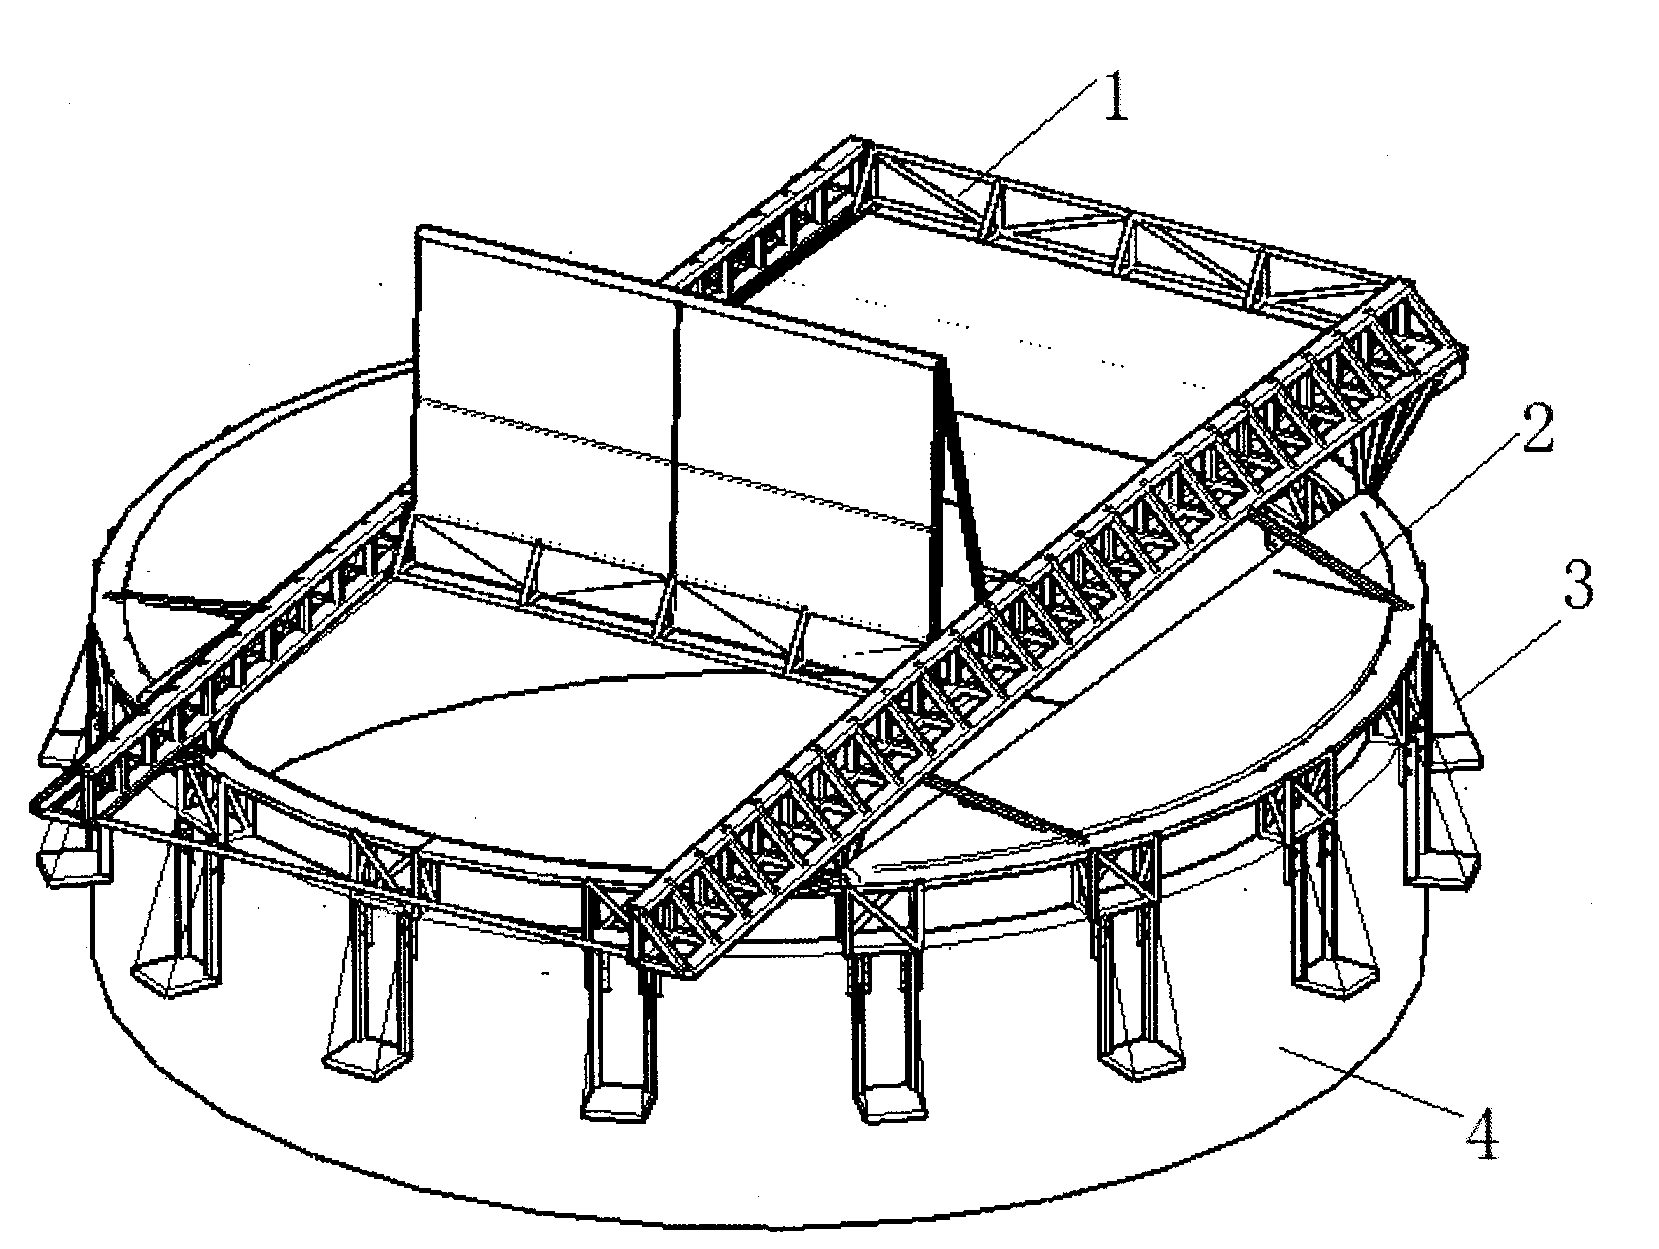 Open-type dome steel structure